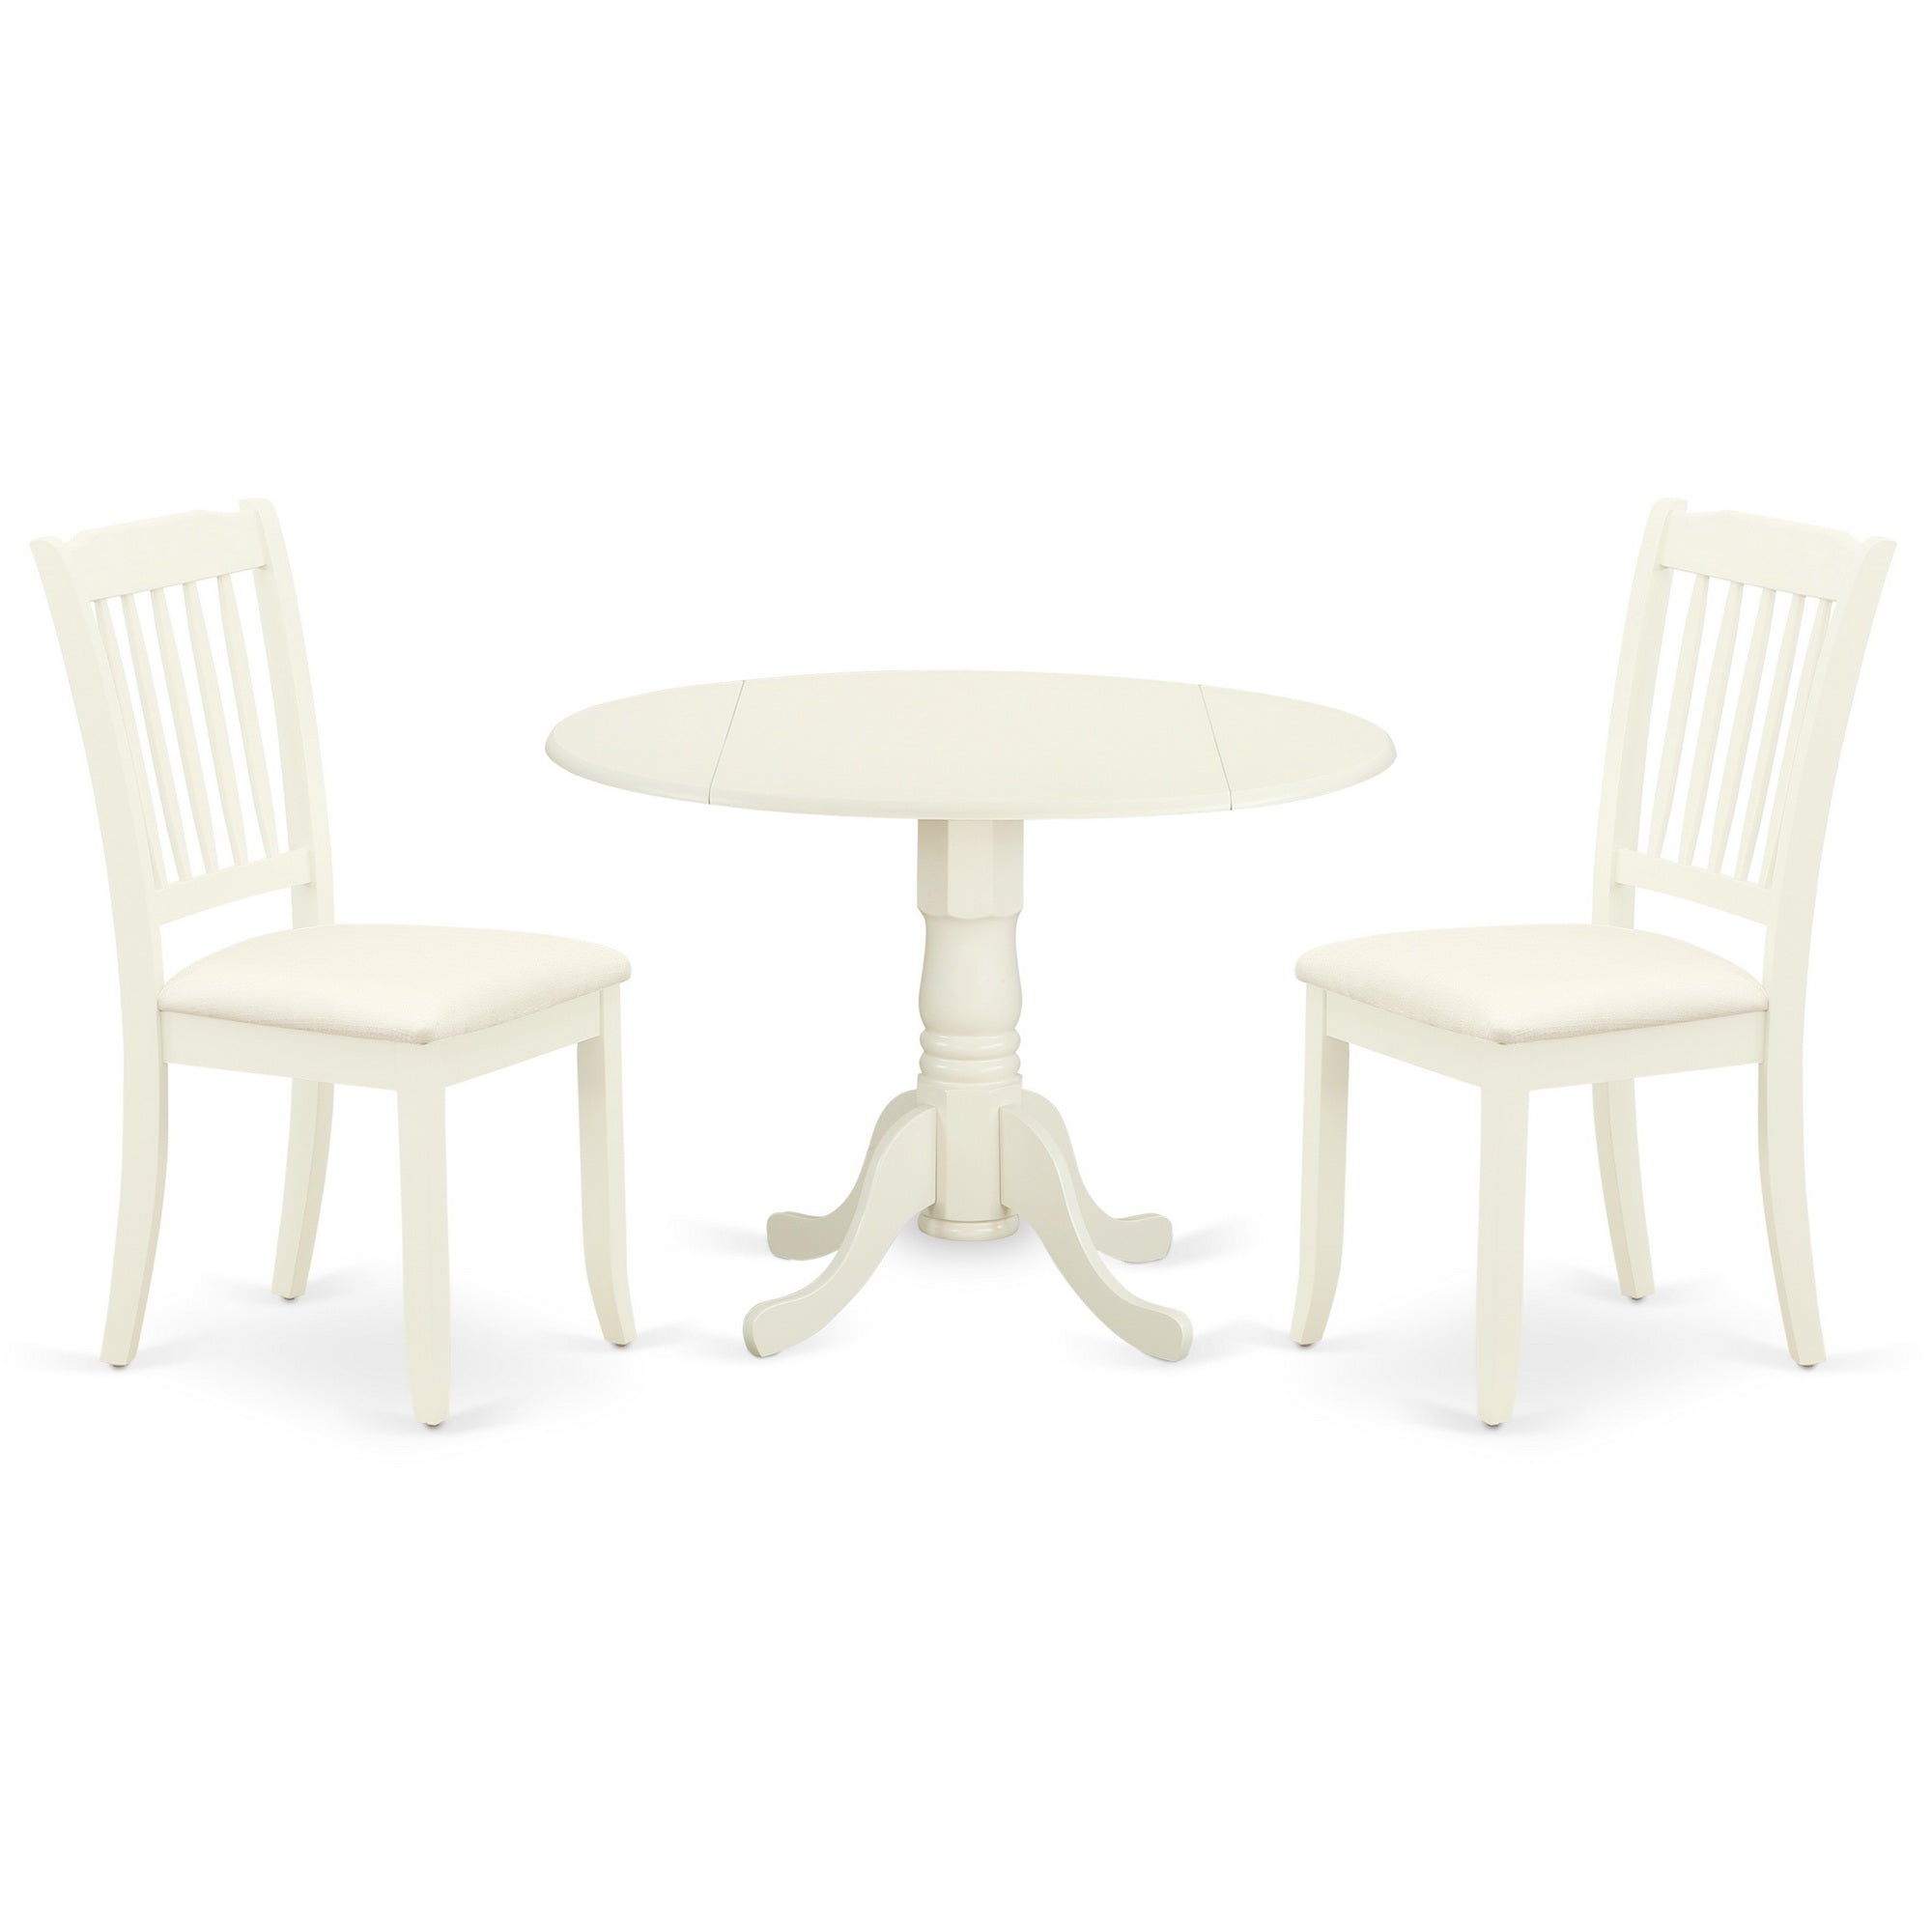 DLDA3-WHI-C 3Pc Dinette Set Includes a Rounded Kitchen Table with Drop Leaves and Two Vertical Slatted Microfiber Seat Dining Chairs, White Finish